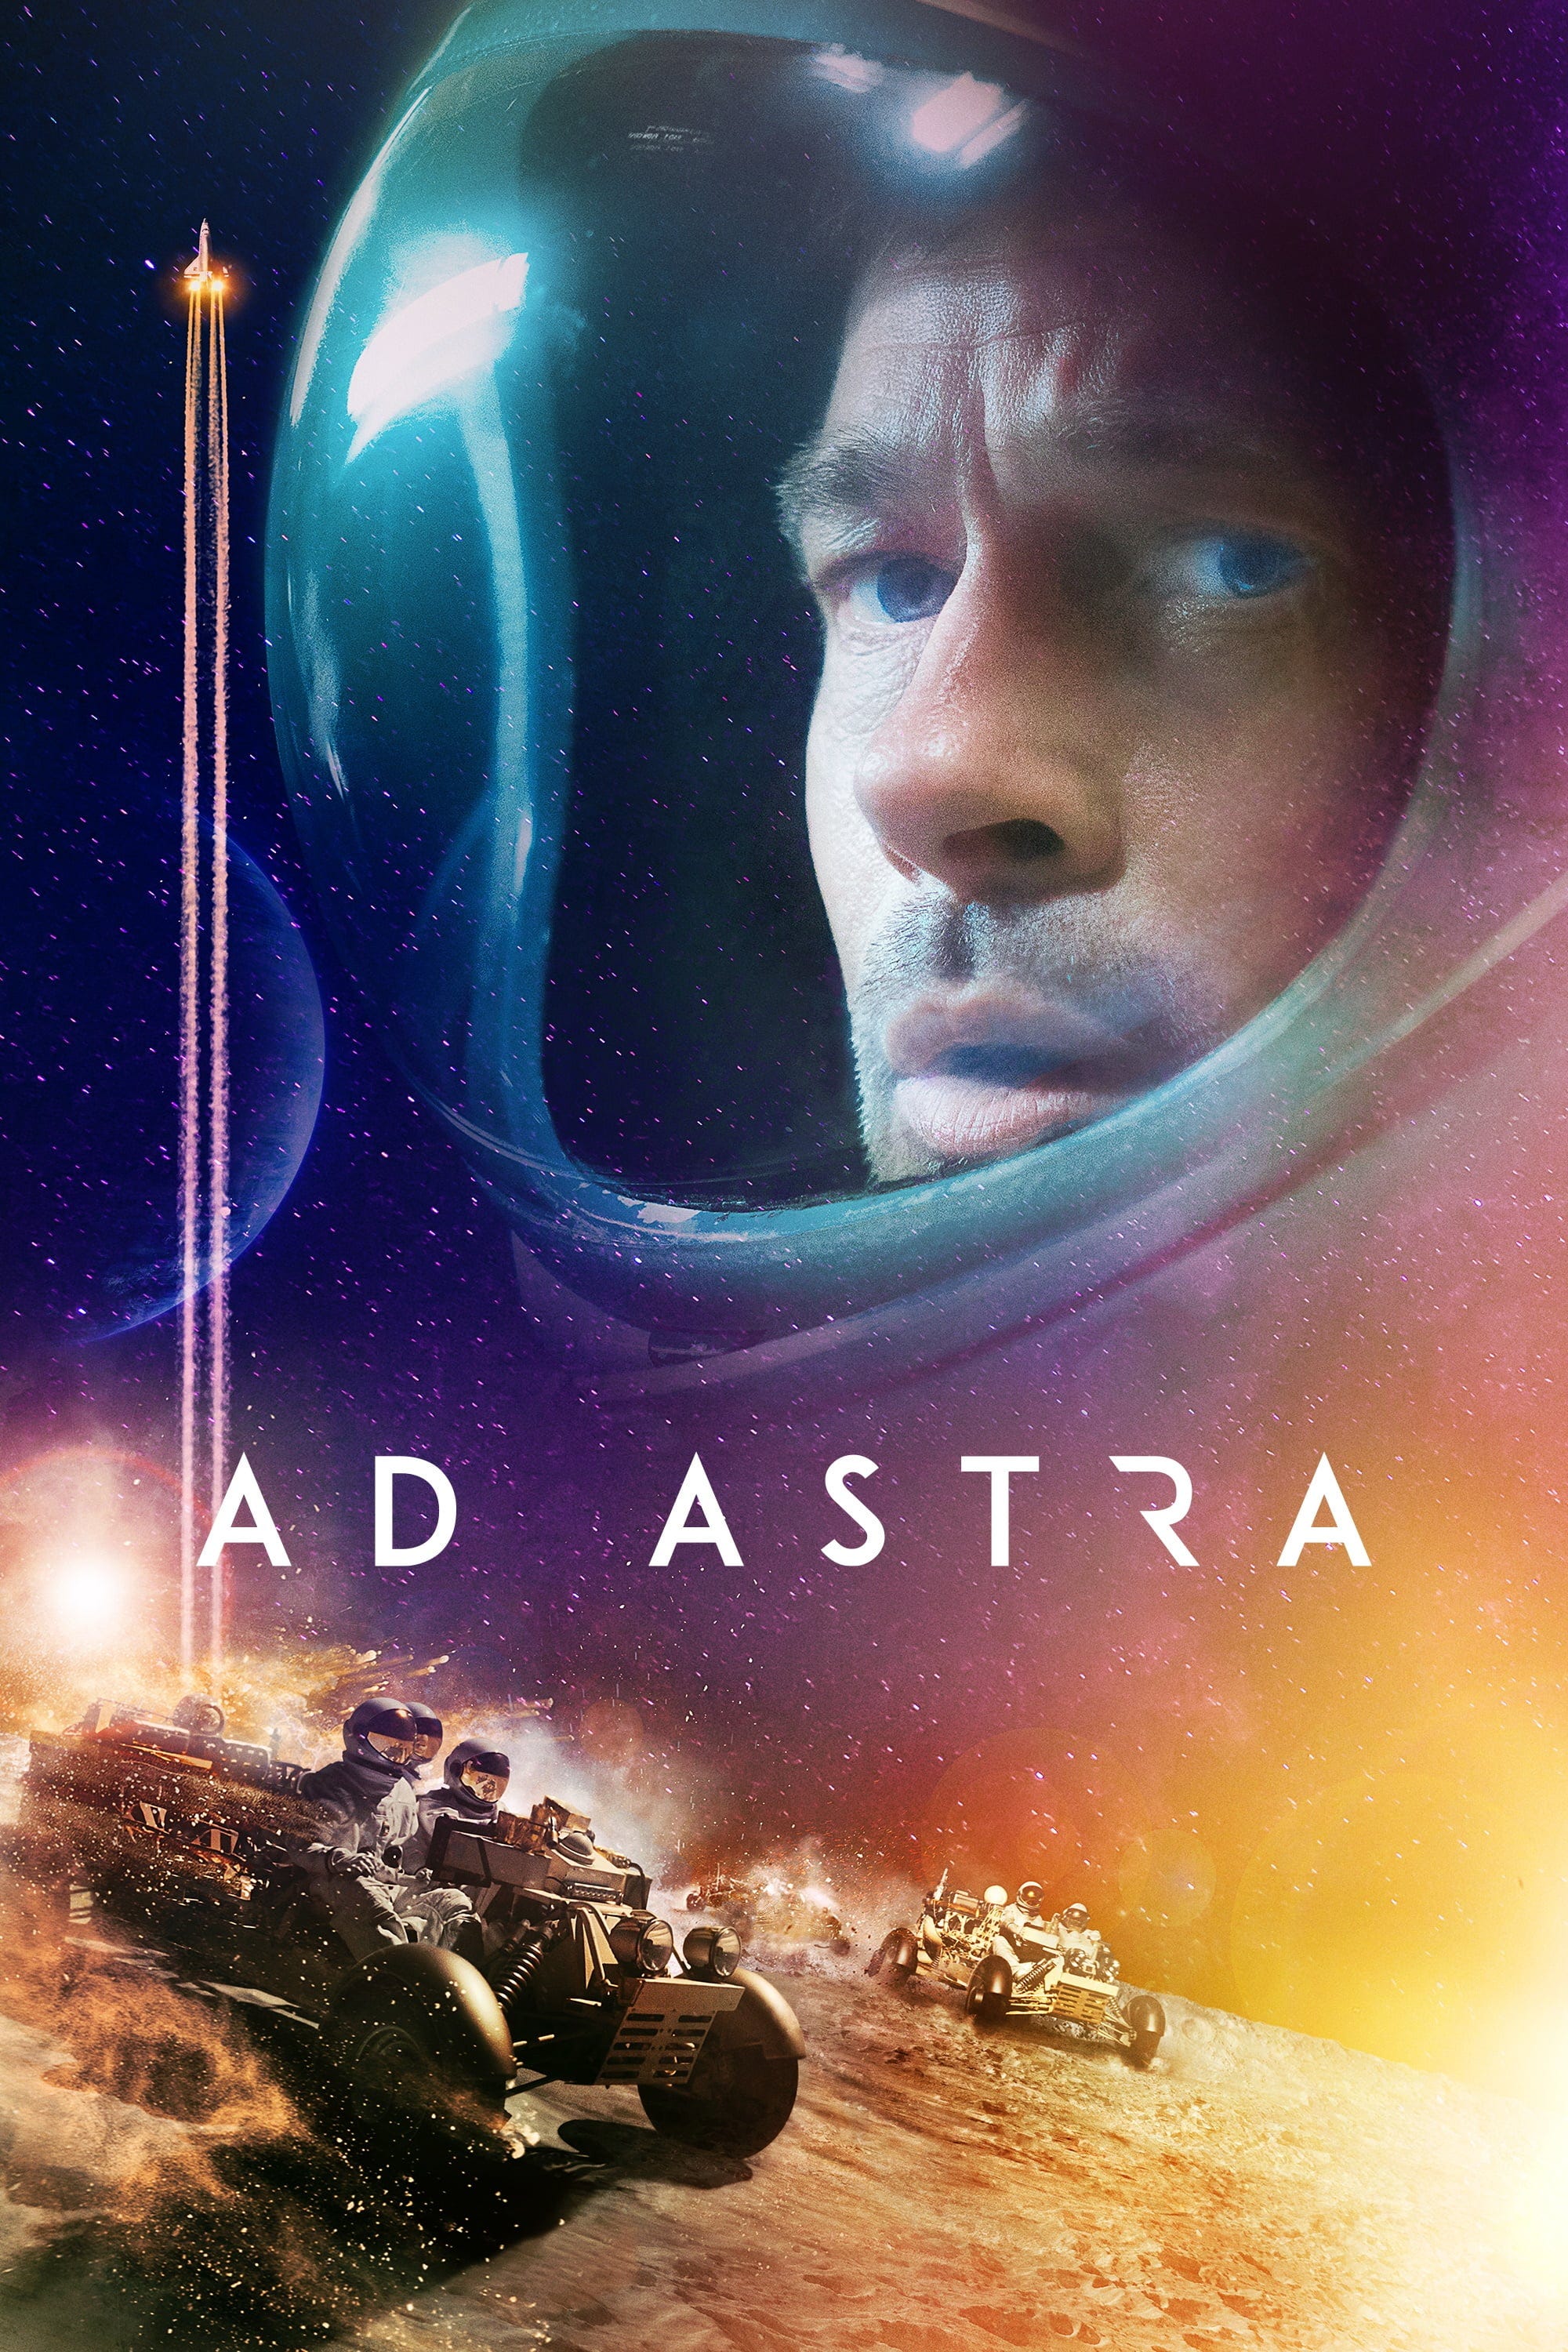 Ad Astra (2019) Hindi Dubbed Movie Download